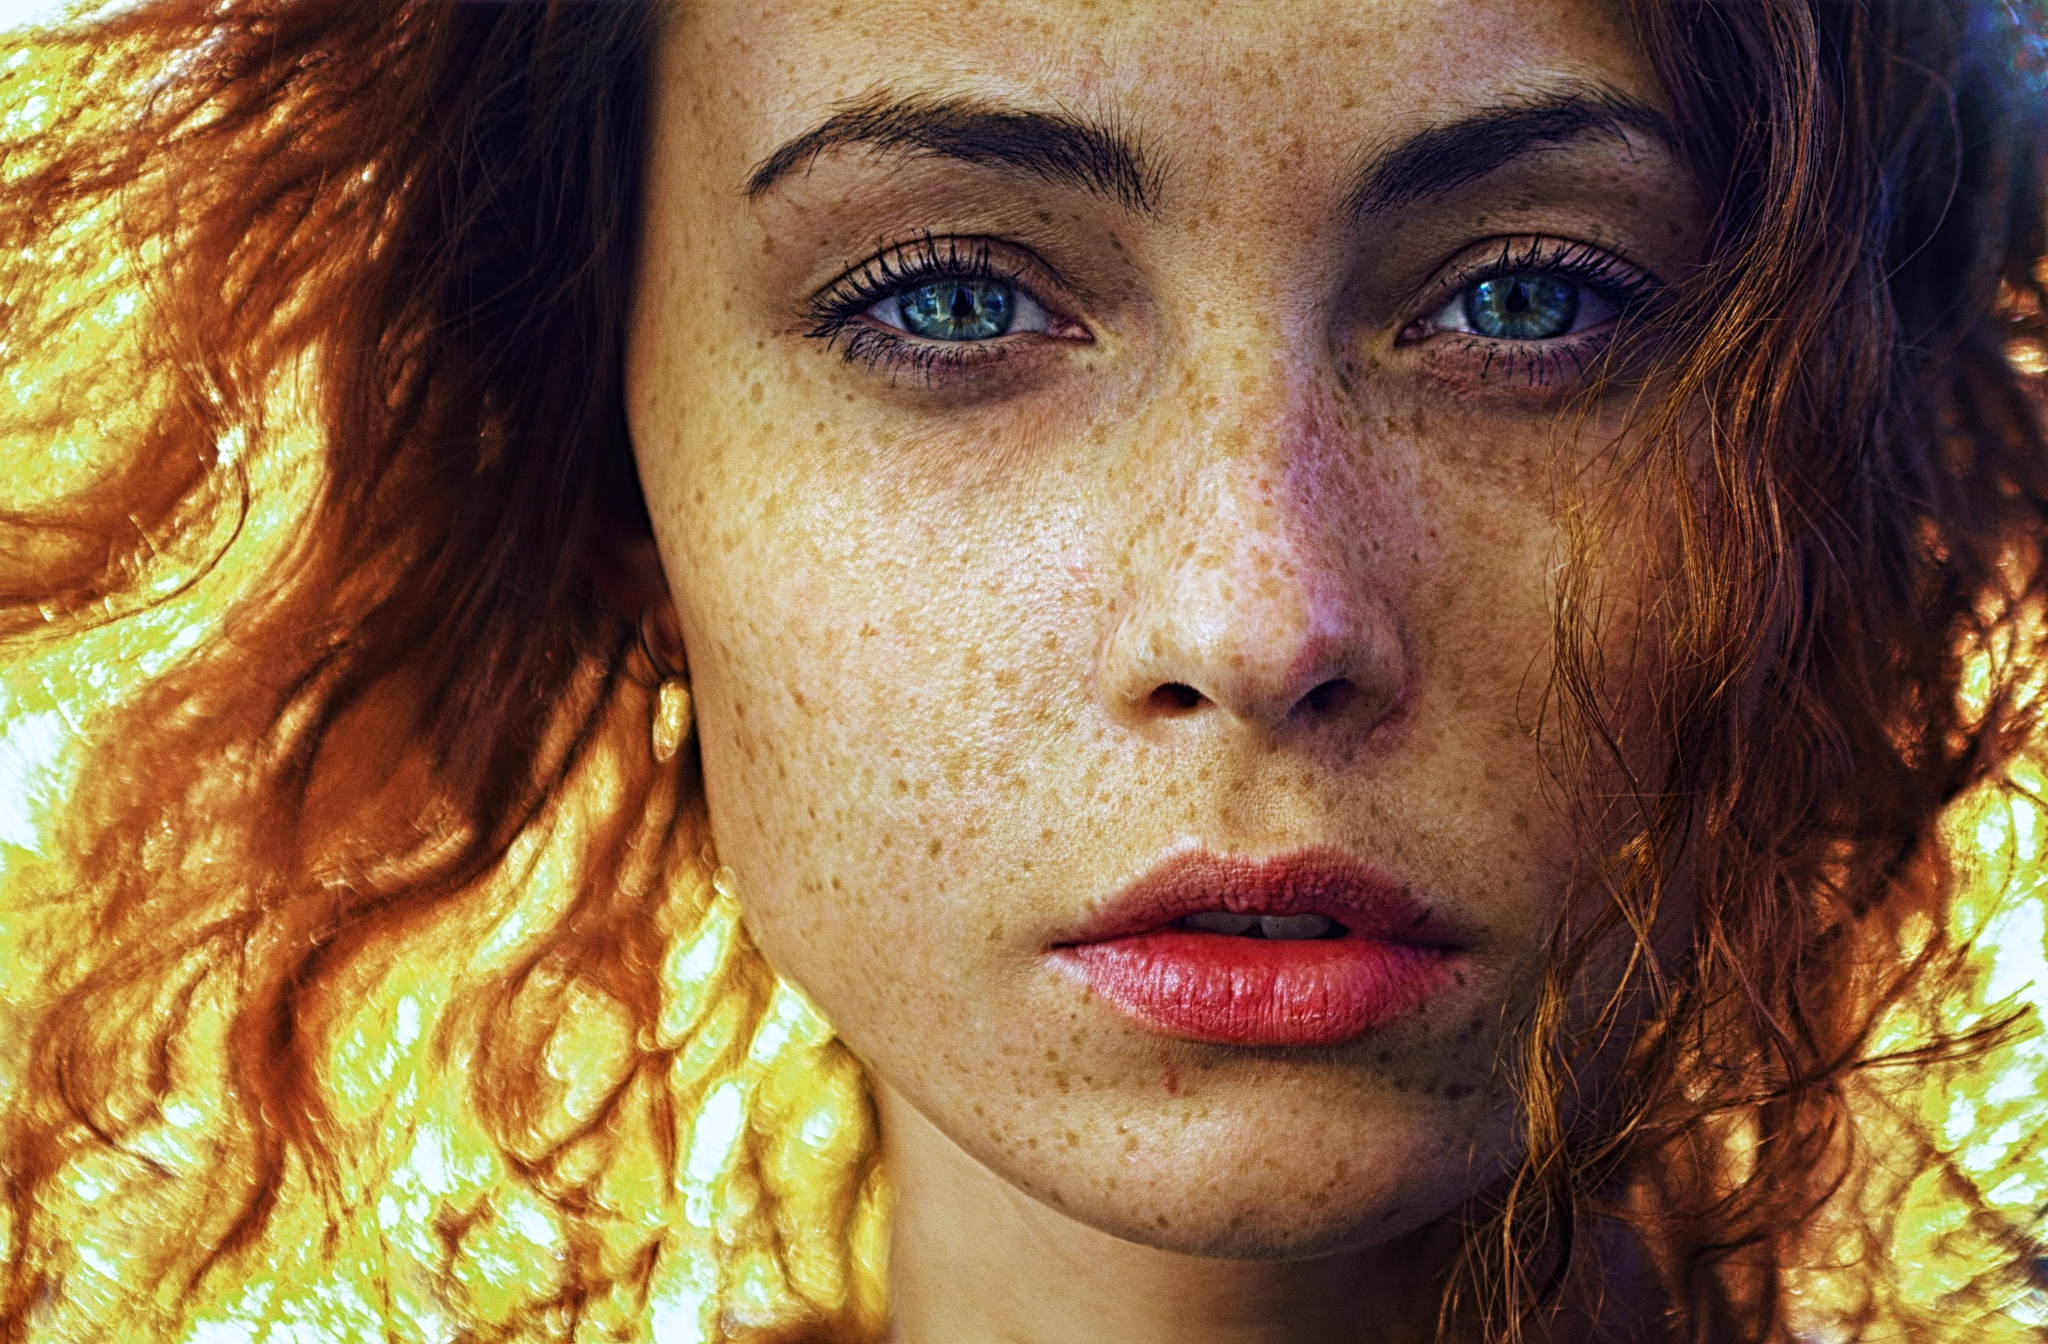 Red hair woman with blue eyes by Darya Chacheva